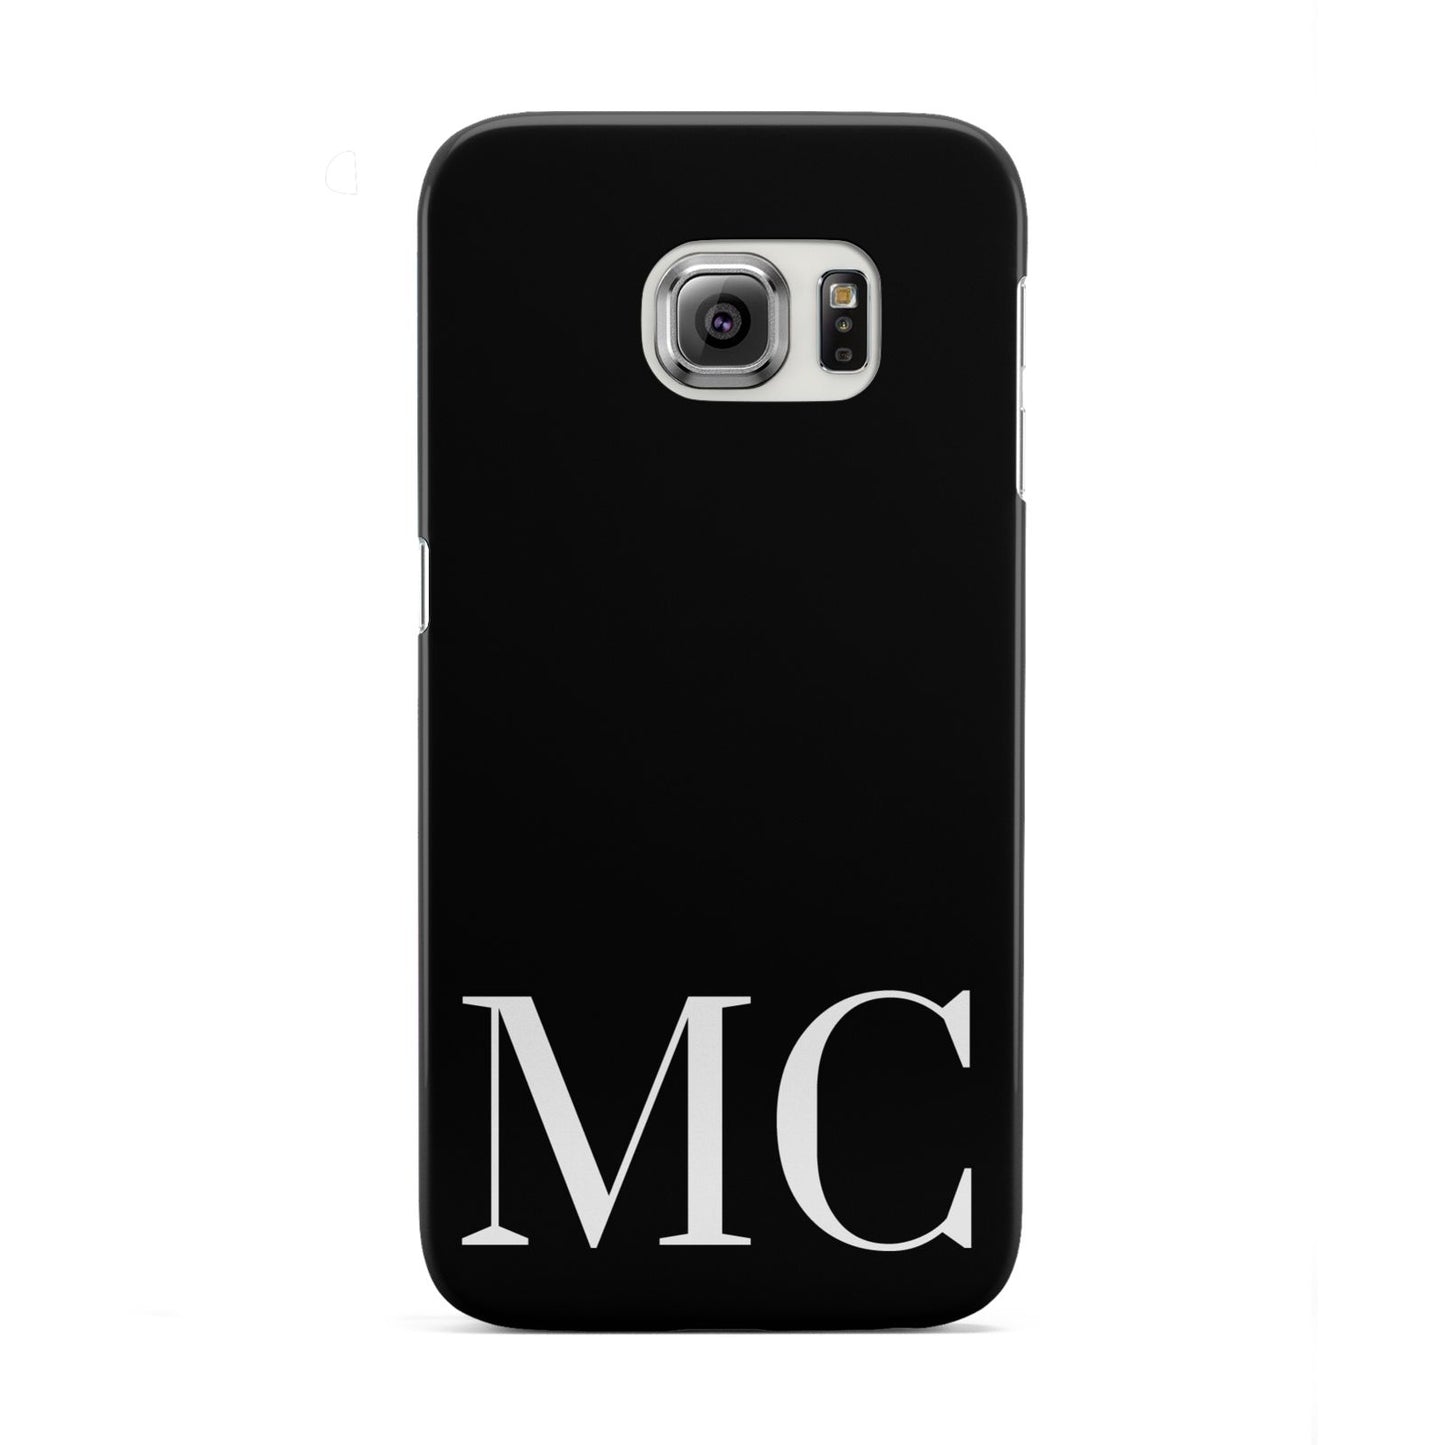 Initials Personalised 1 Samsung Galaxy S6 Edge Case